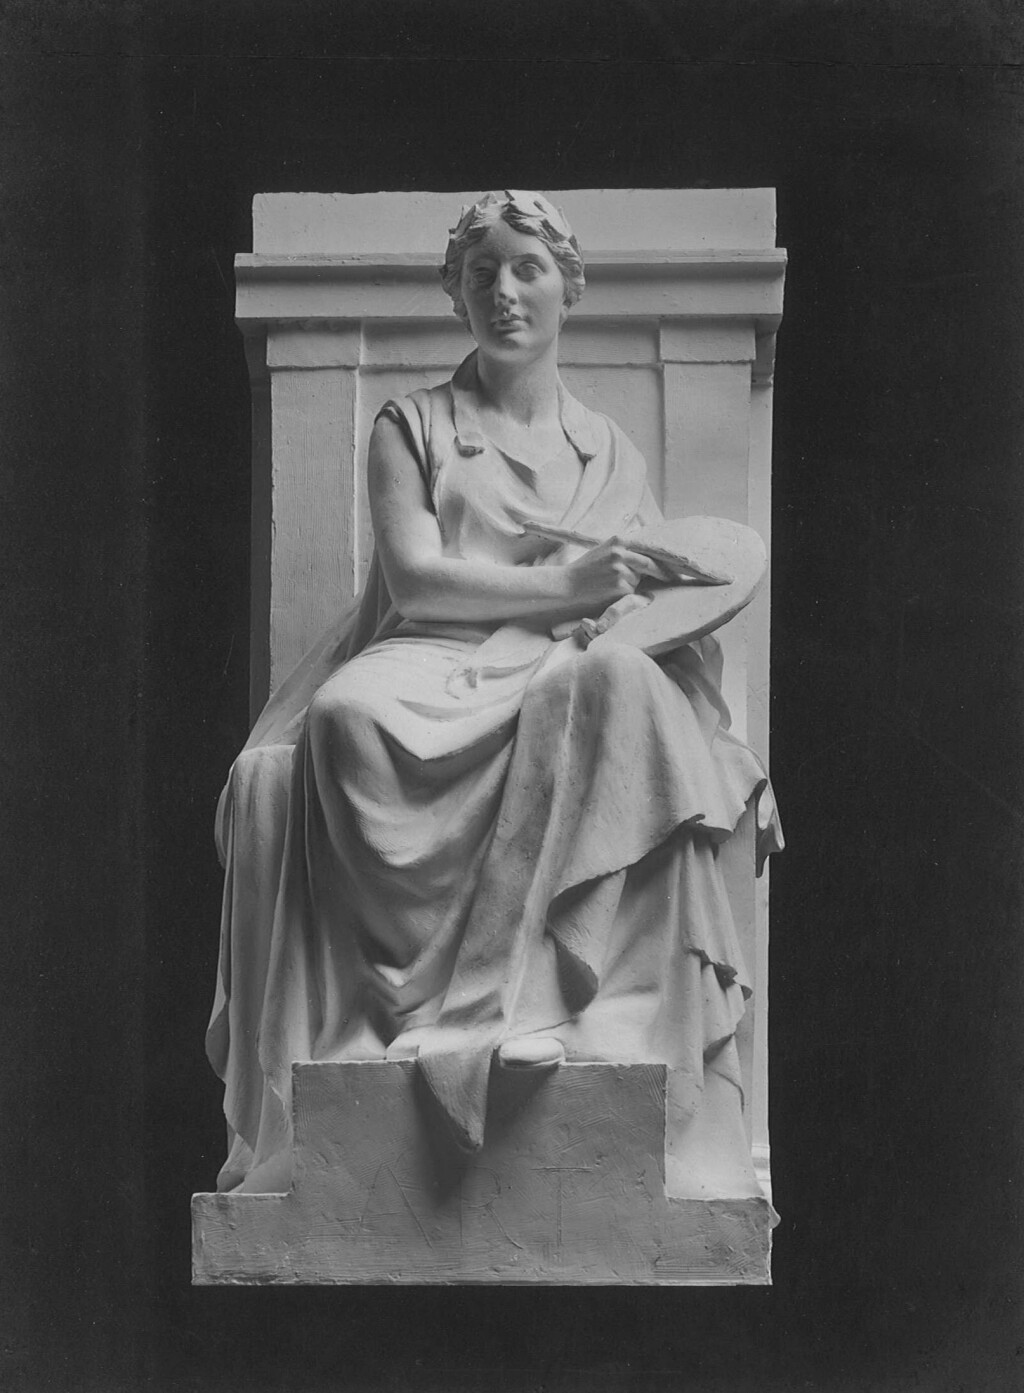 Black-and-white photograph of a plaster model showing a seated woman in an architectural setting holding a palette and paintbrush, against a black background